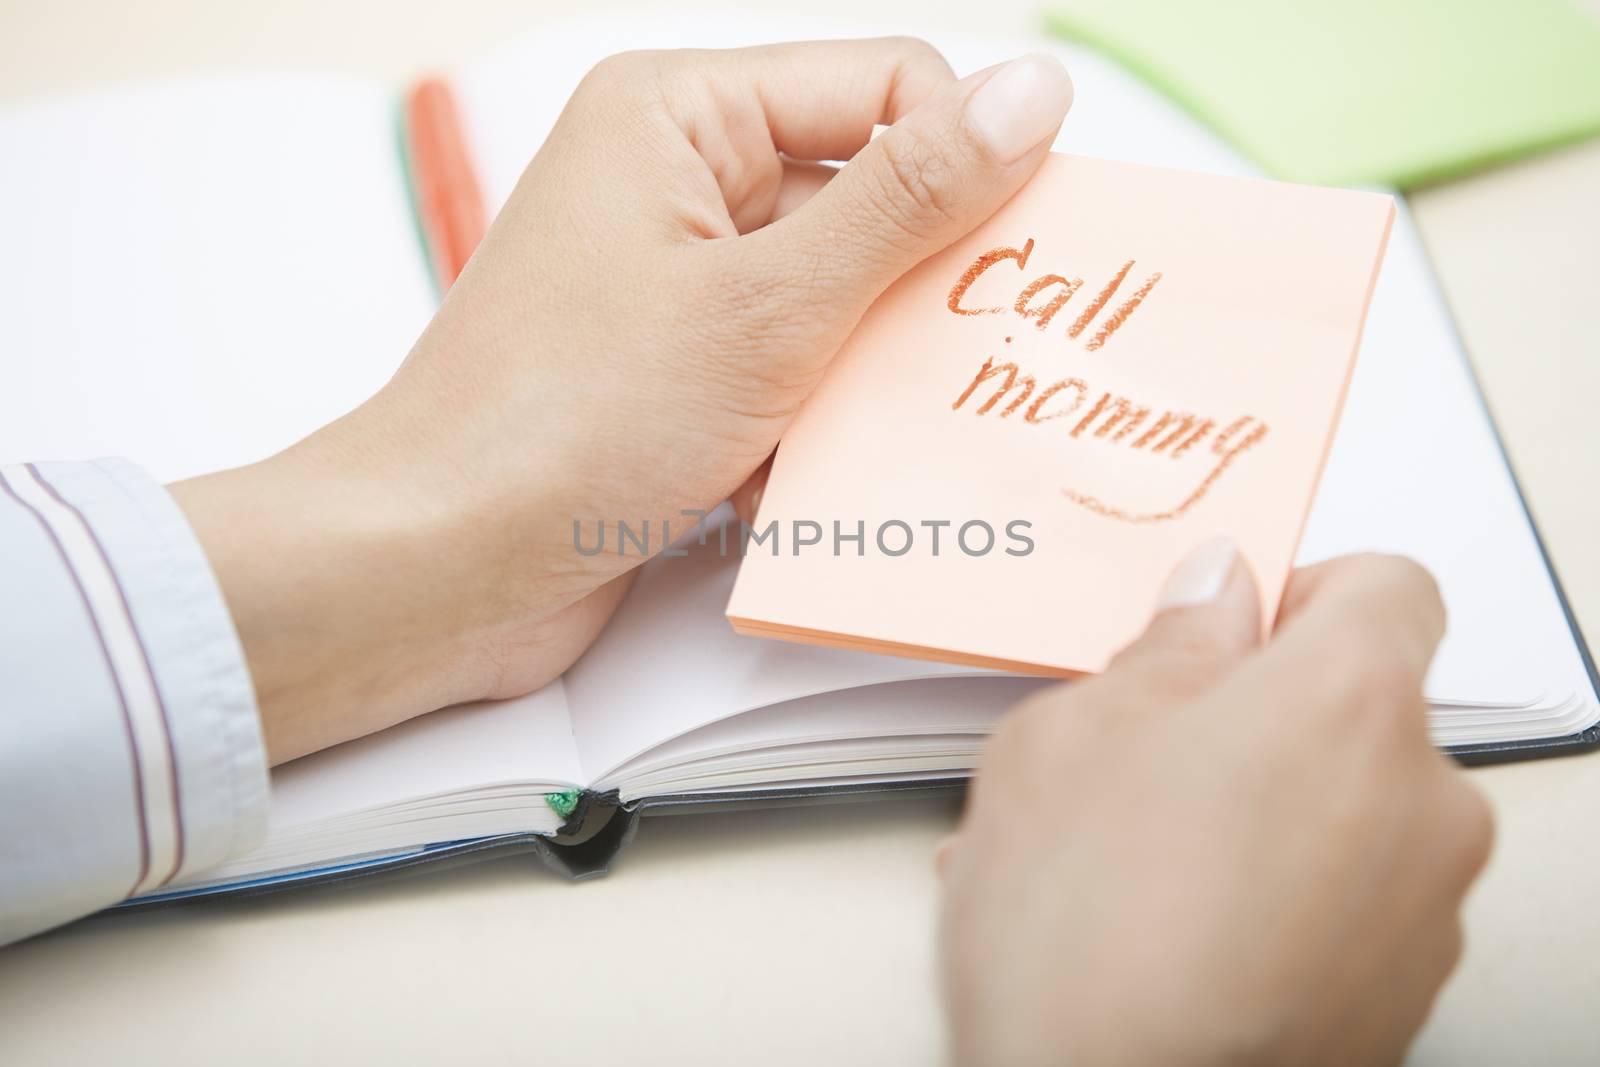 Call mommy text on adhesive note by Novic